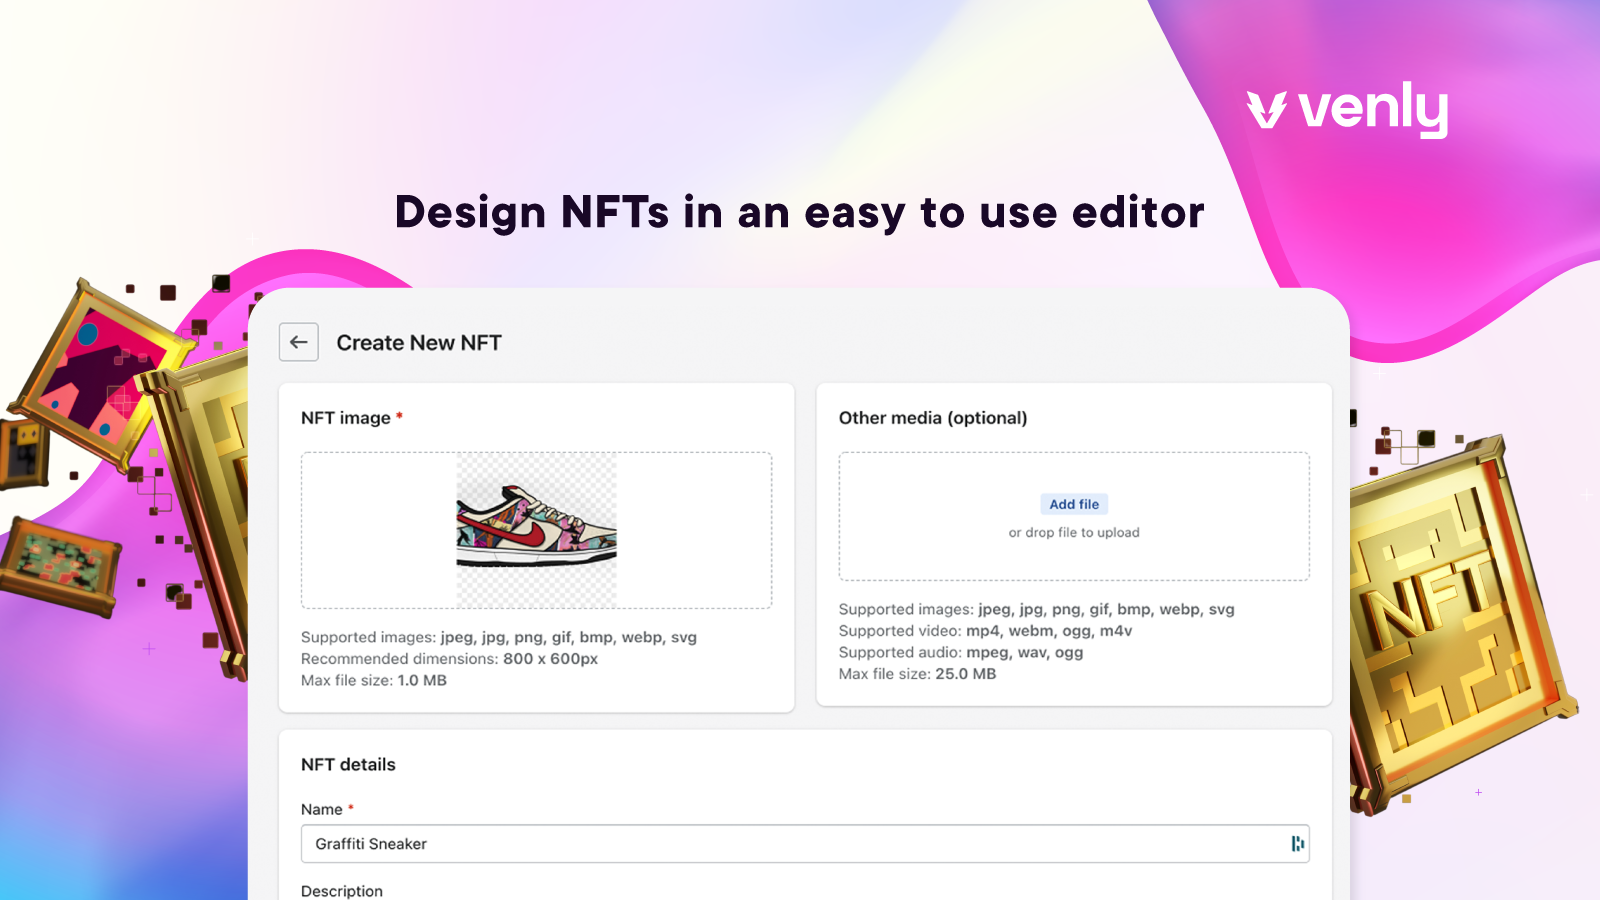 Design NFTs in an easy to use editor